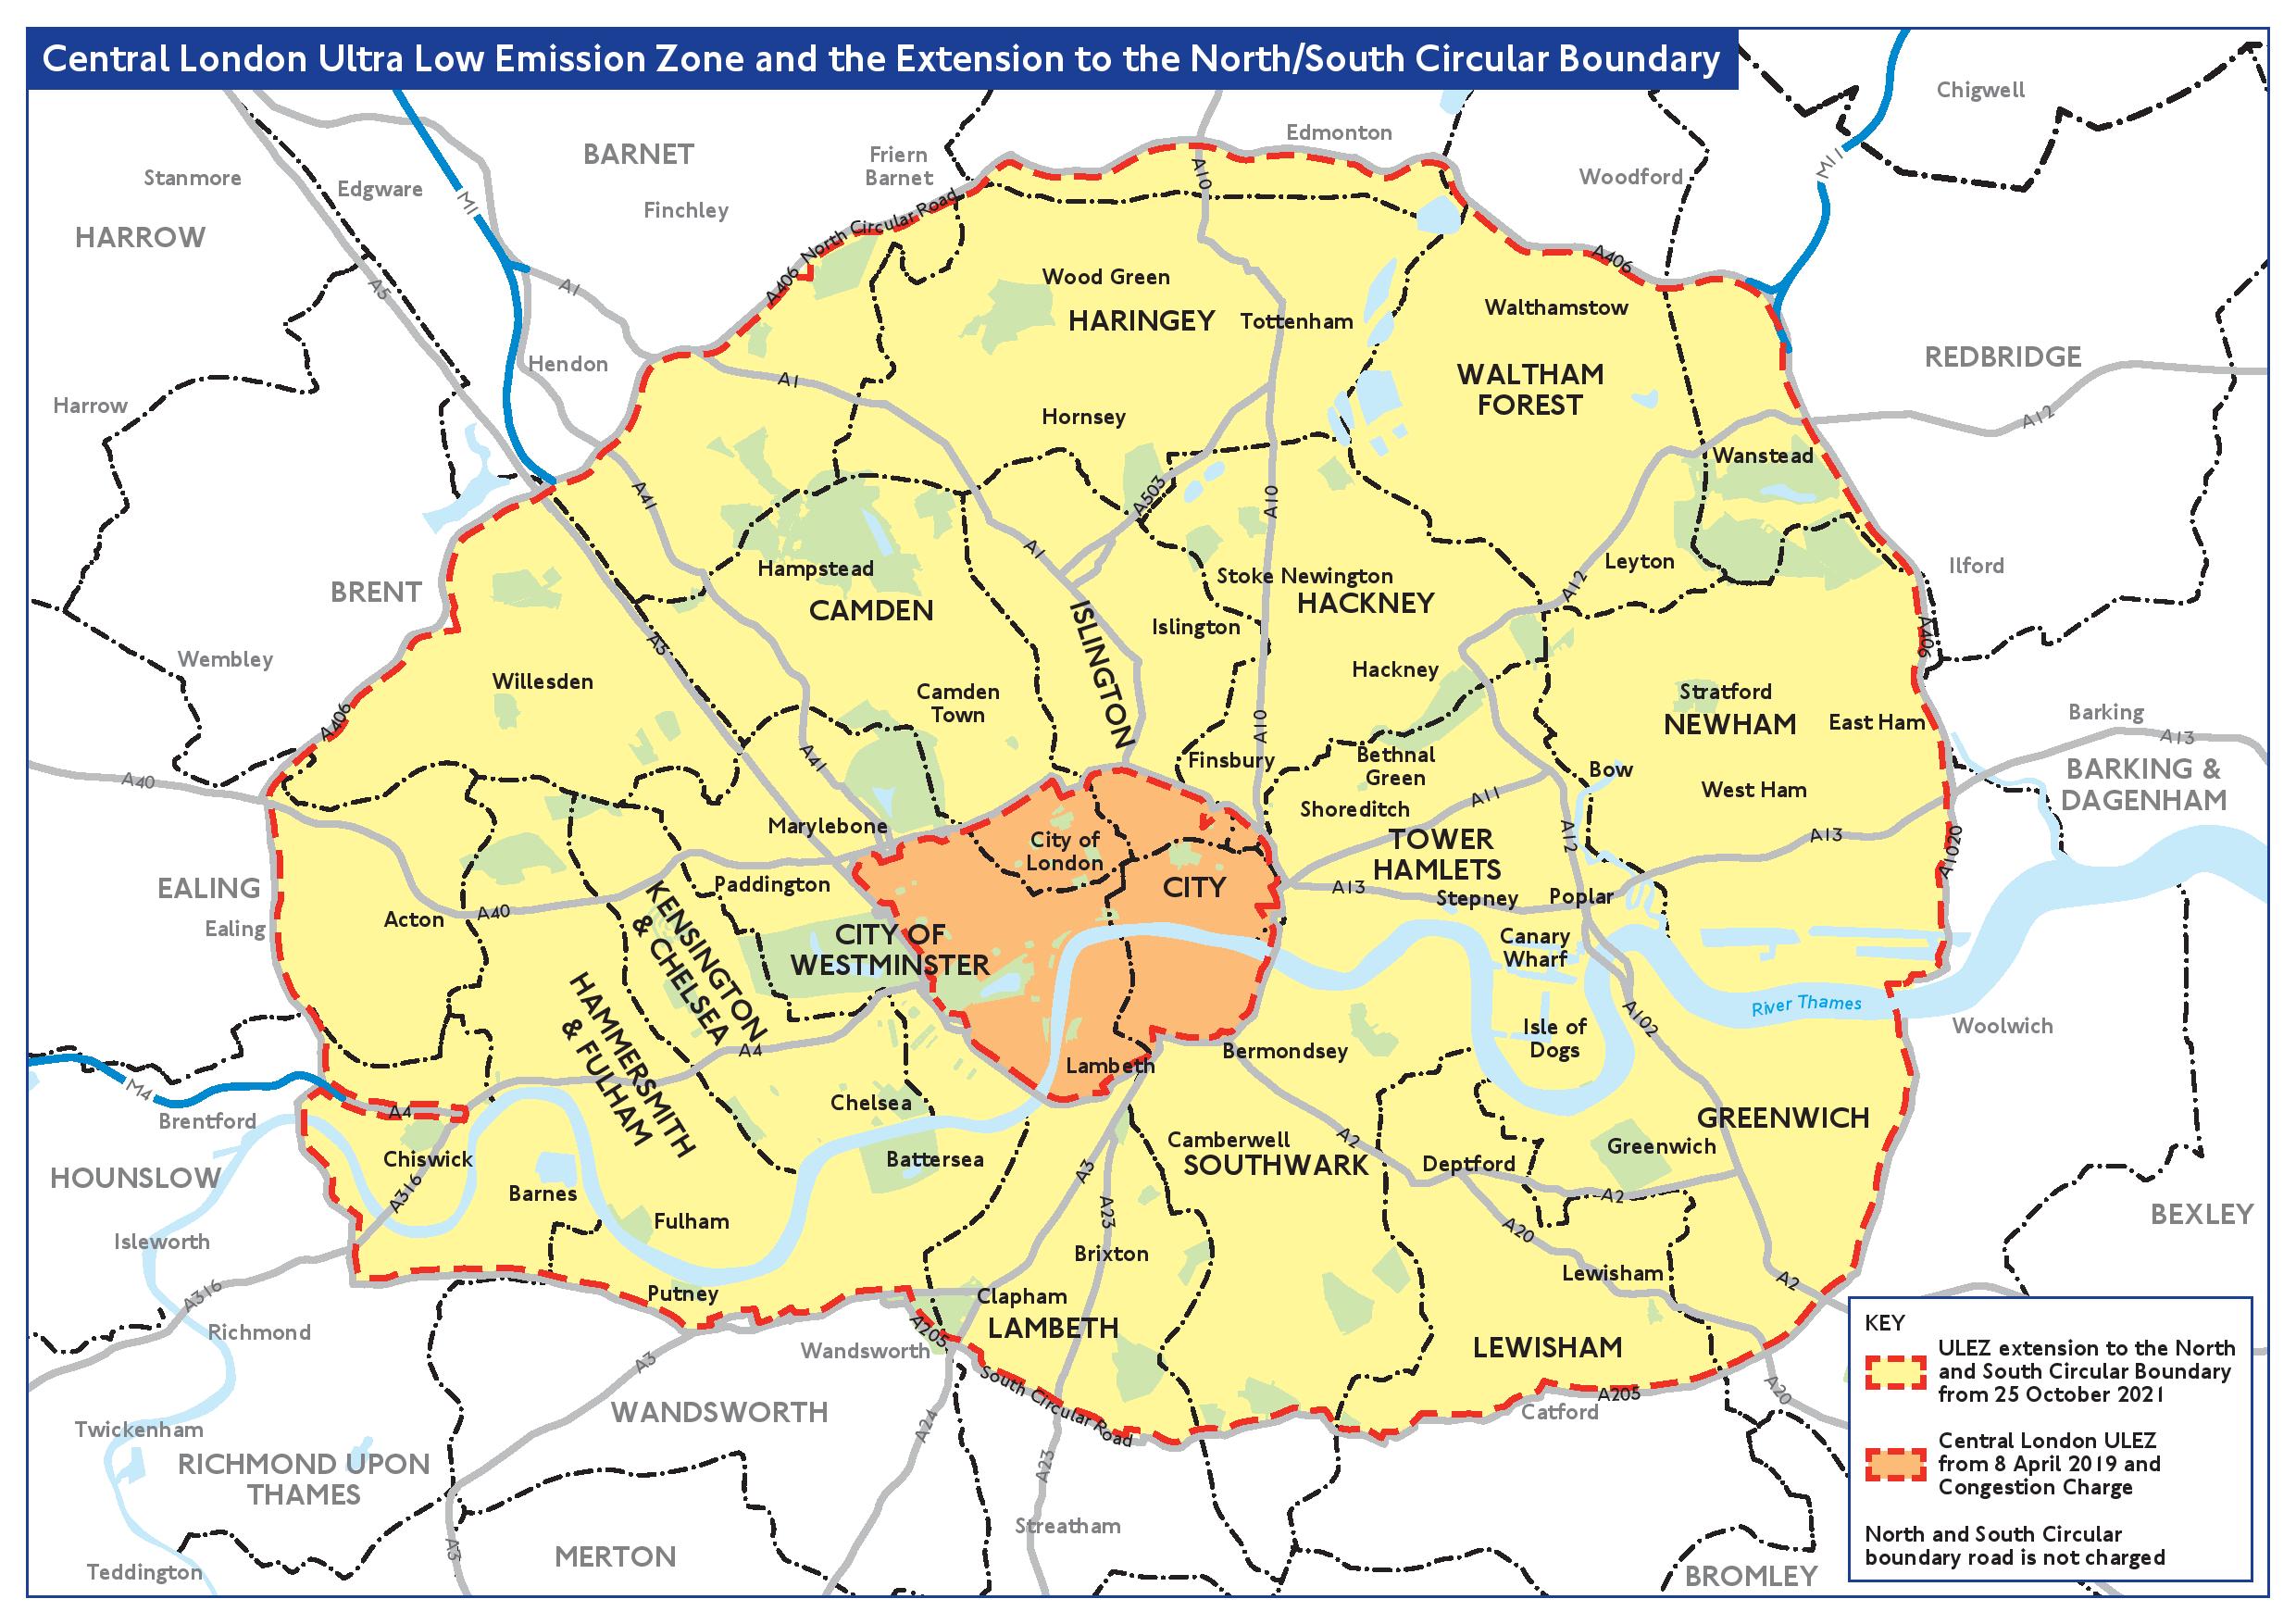 Why London's Ultra Low Emissions Zone is good policy